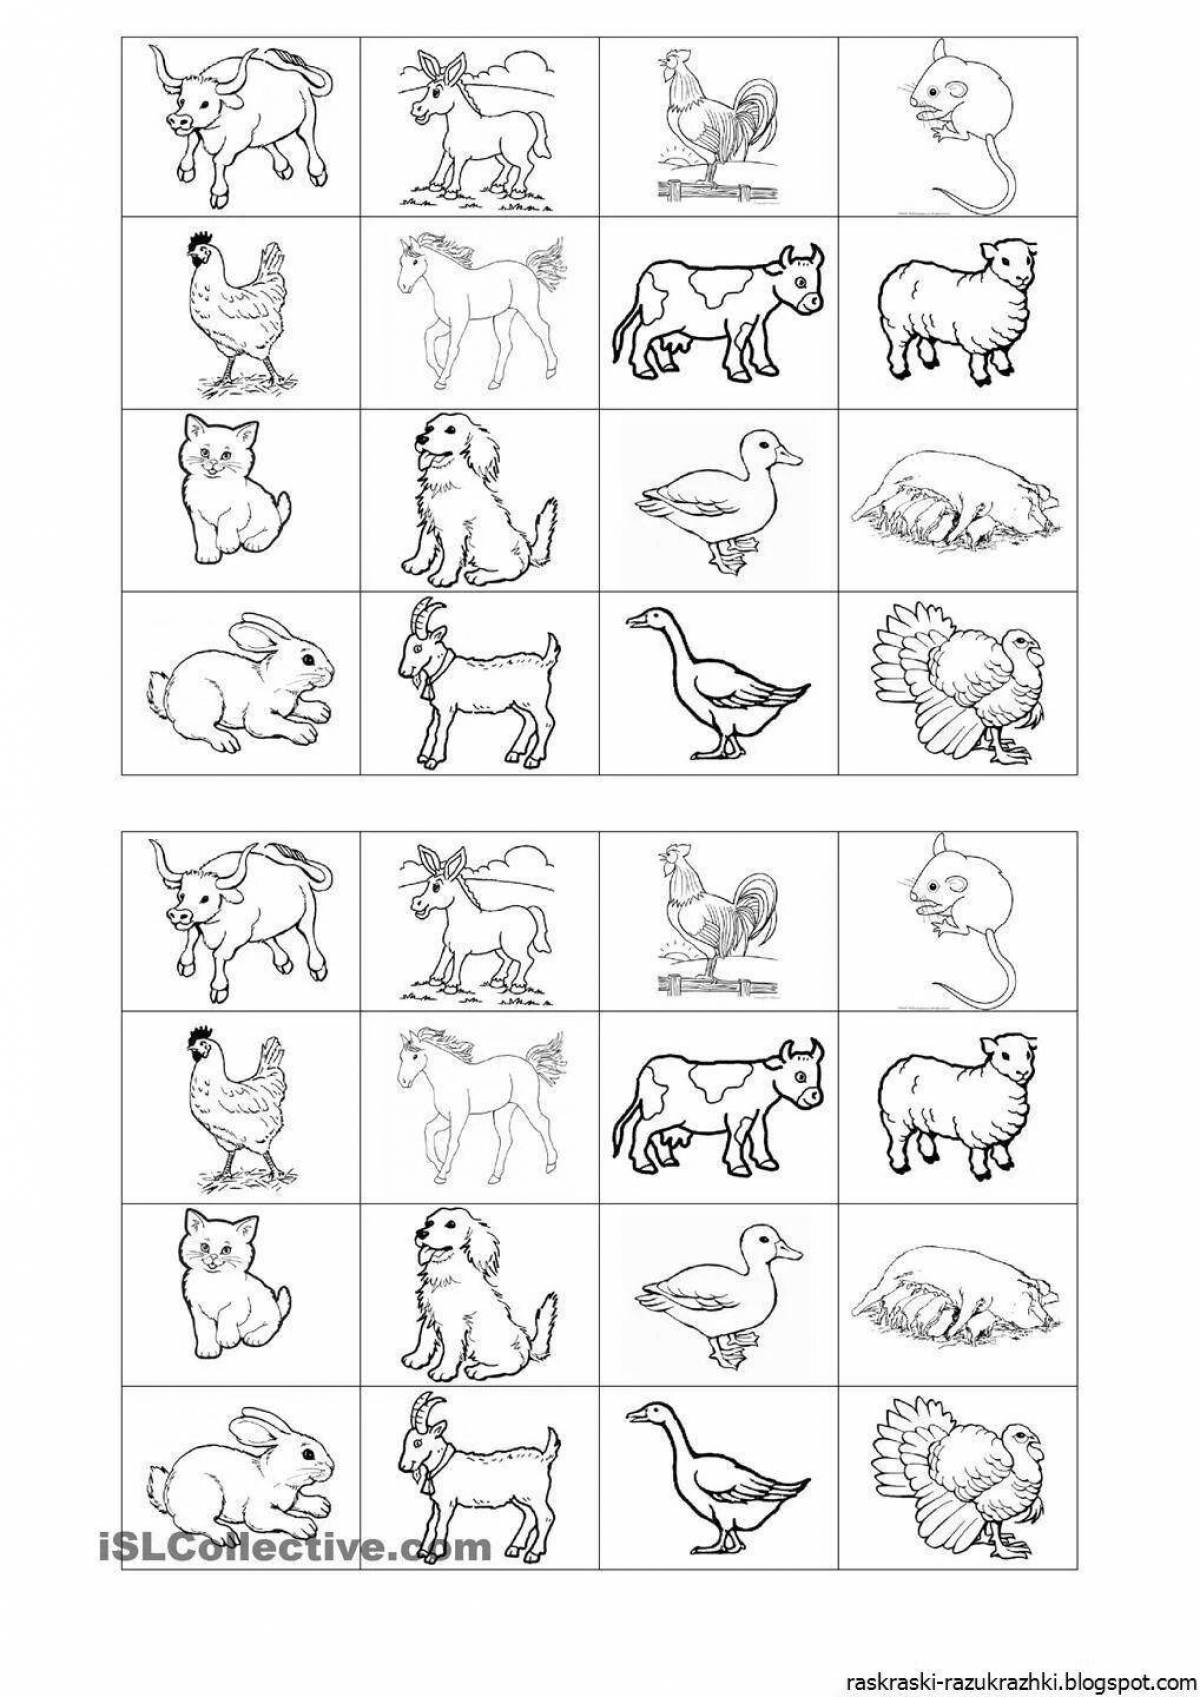 Colourful coloring pages for colleagues